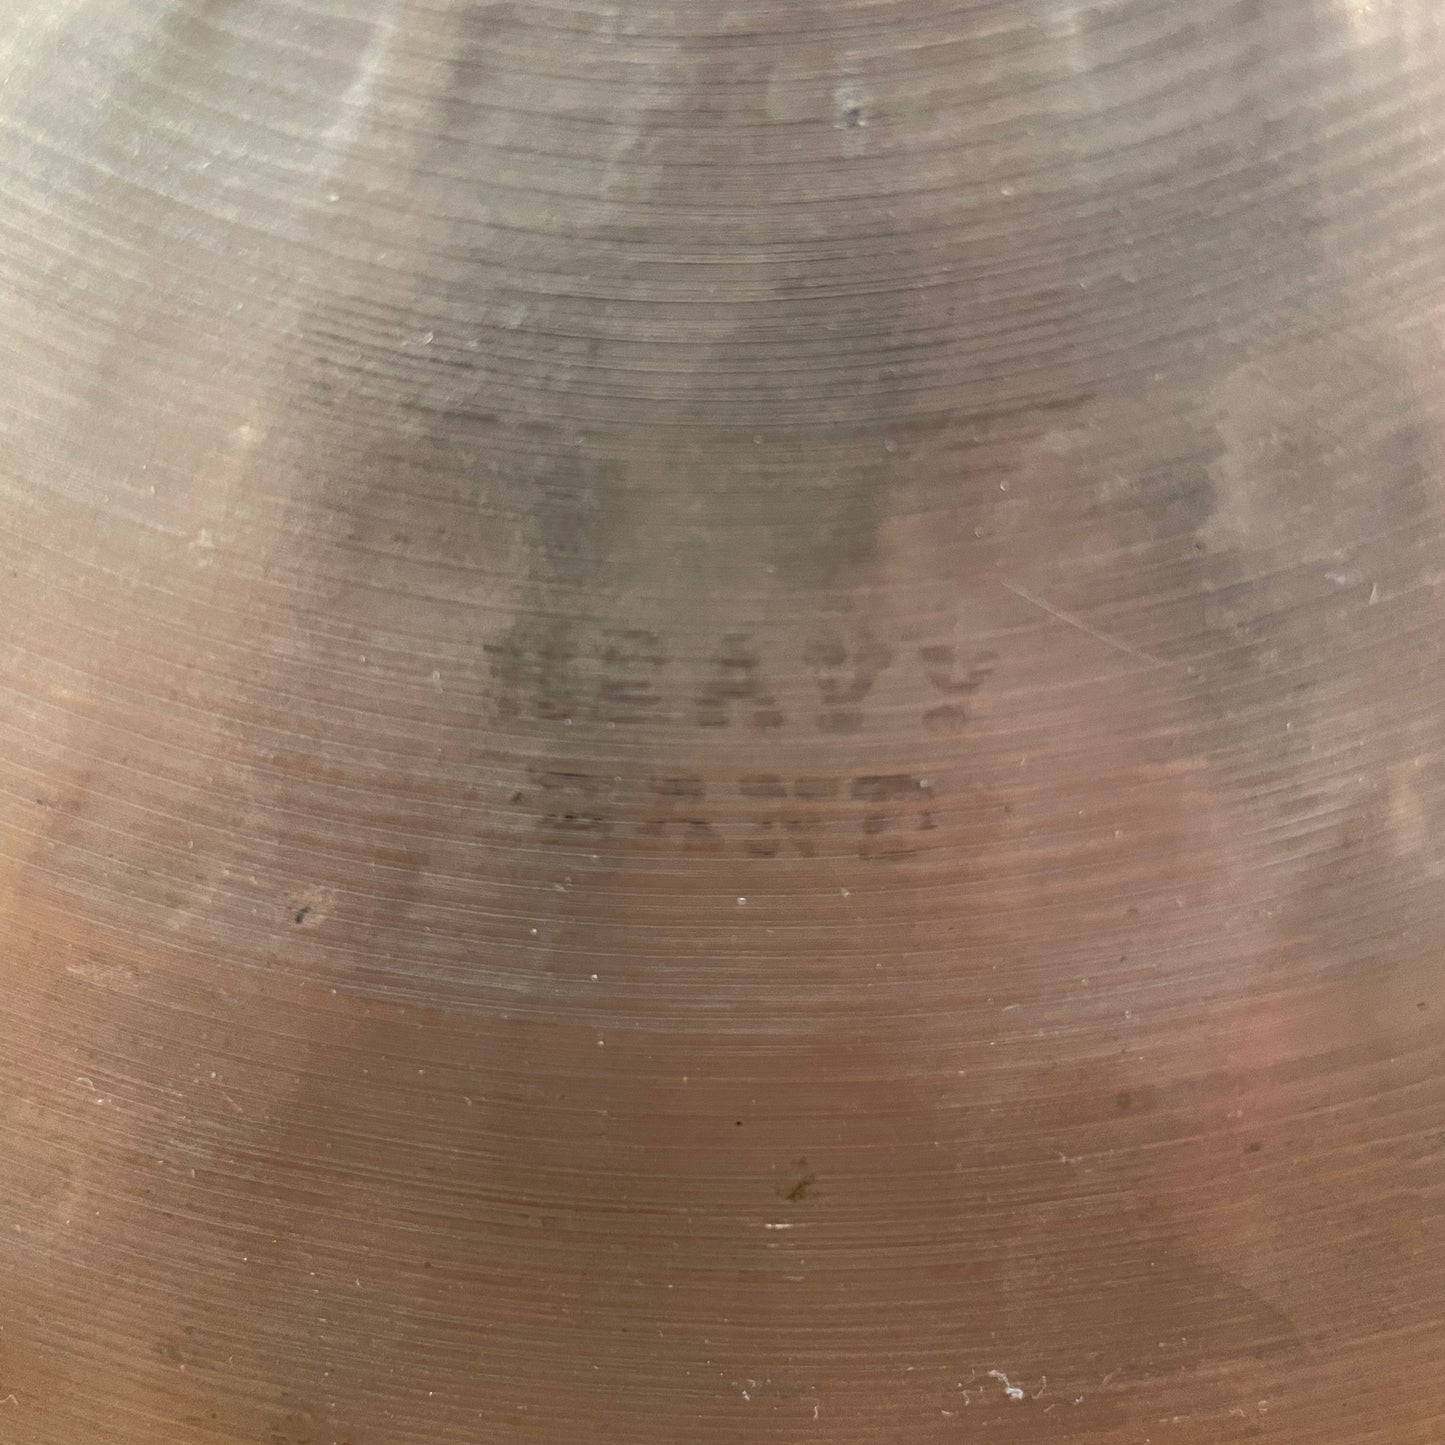 14" Pasha Heavy Band Small Ride / Hi-Hat Cymbal Single 1120g Made in Italy *Video Demo*